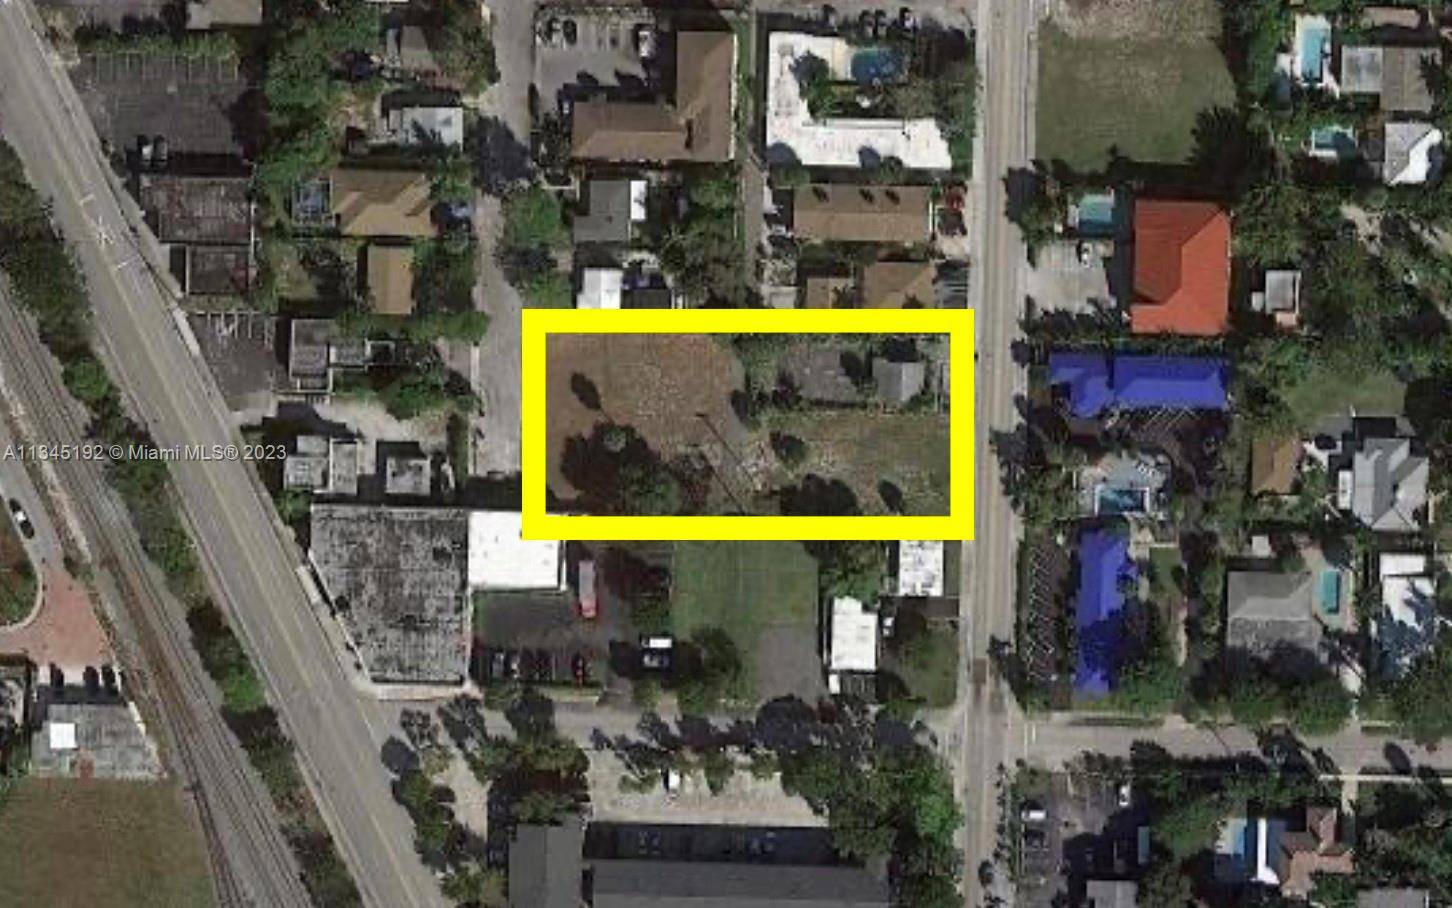 INCREDIBLE Opportunity to purchase 3 connected parcels totaling over 3 4 acre in PRIME Lake Worth Beach Federal Highway Location.